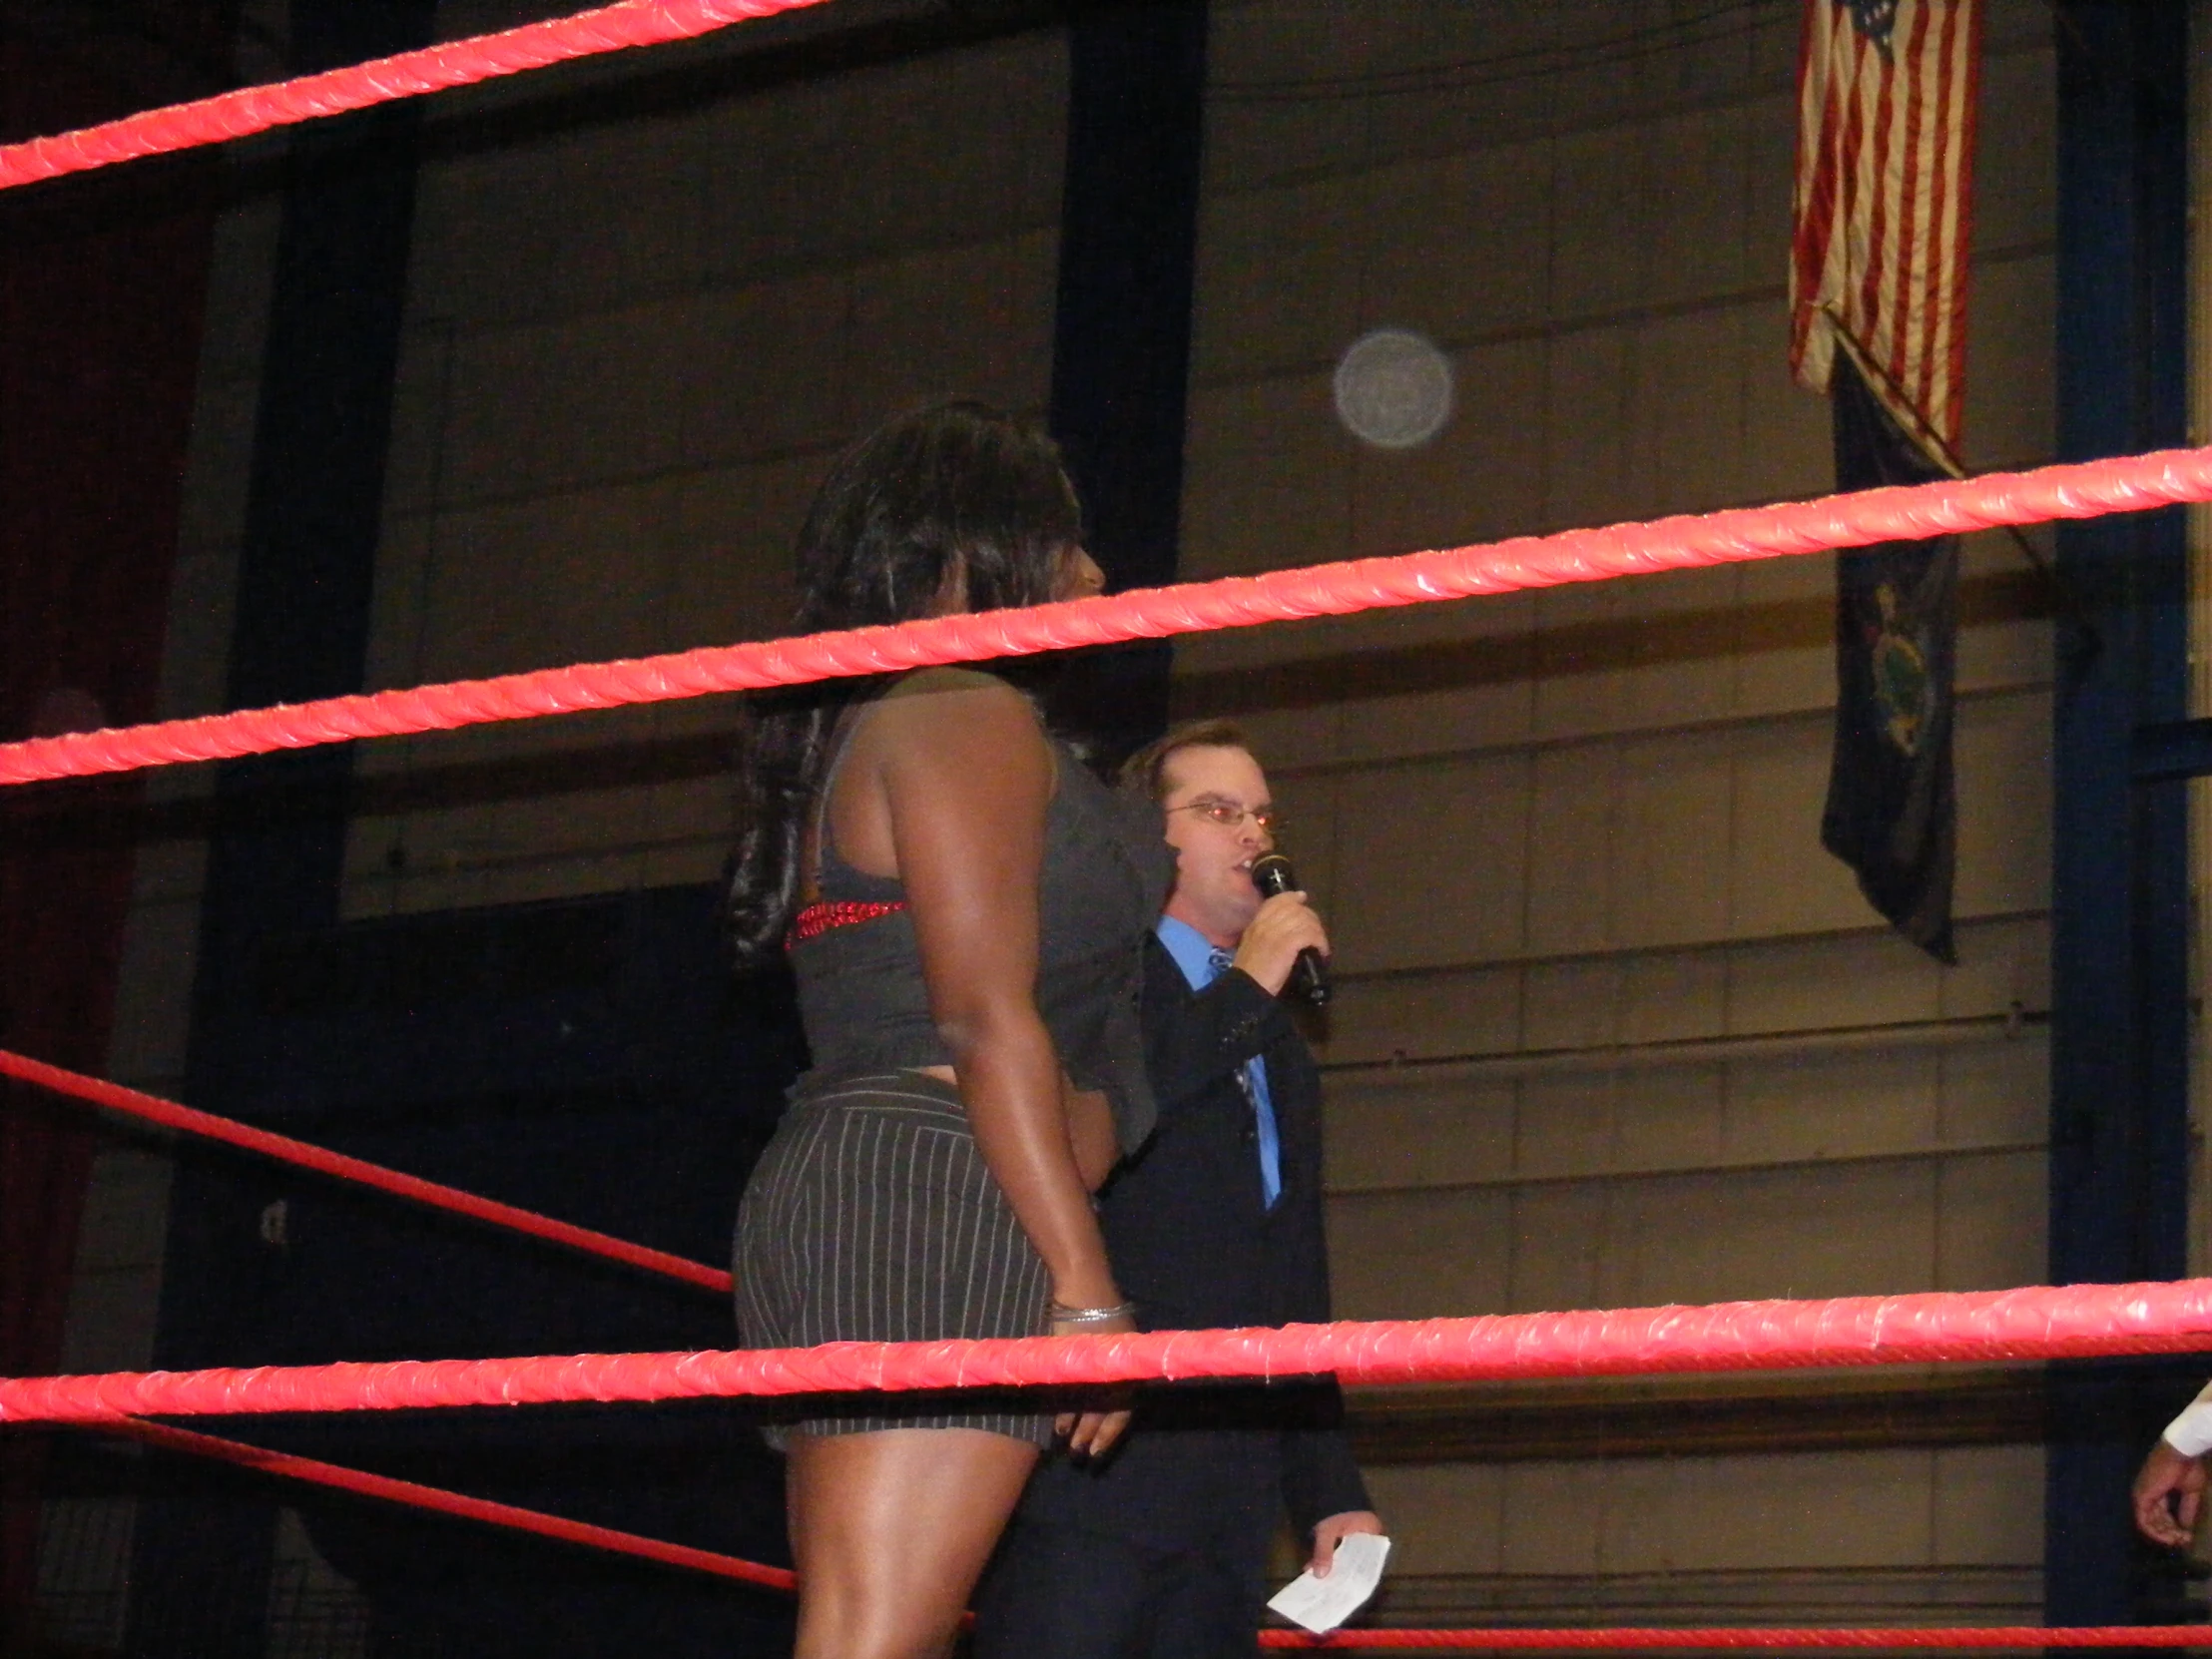 a man standing behind a red wrestling ring while a woman talks on a cell phone